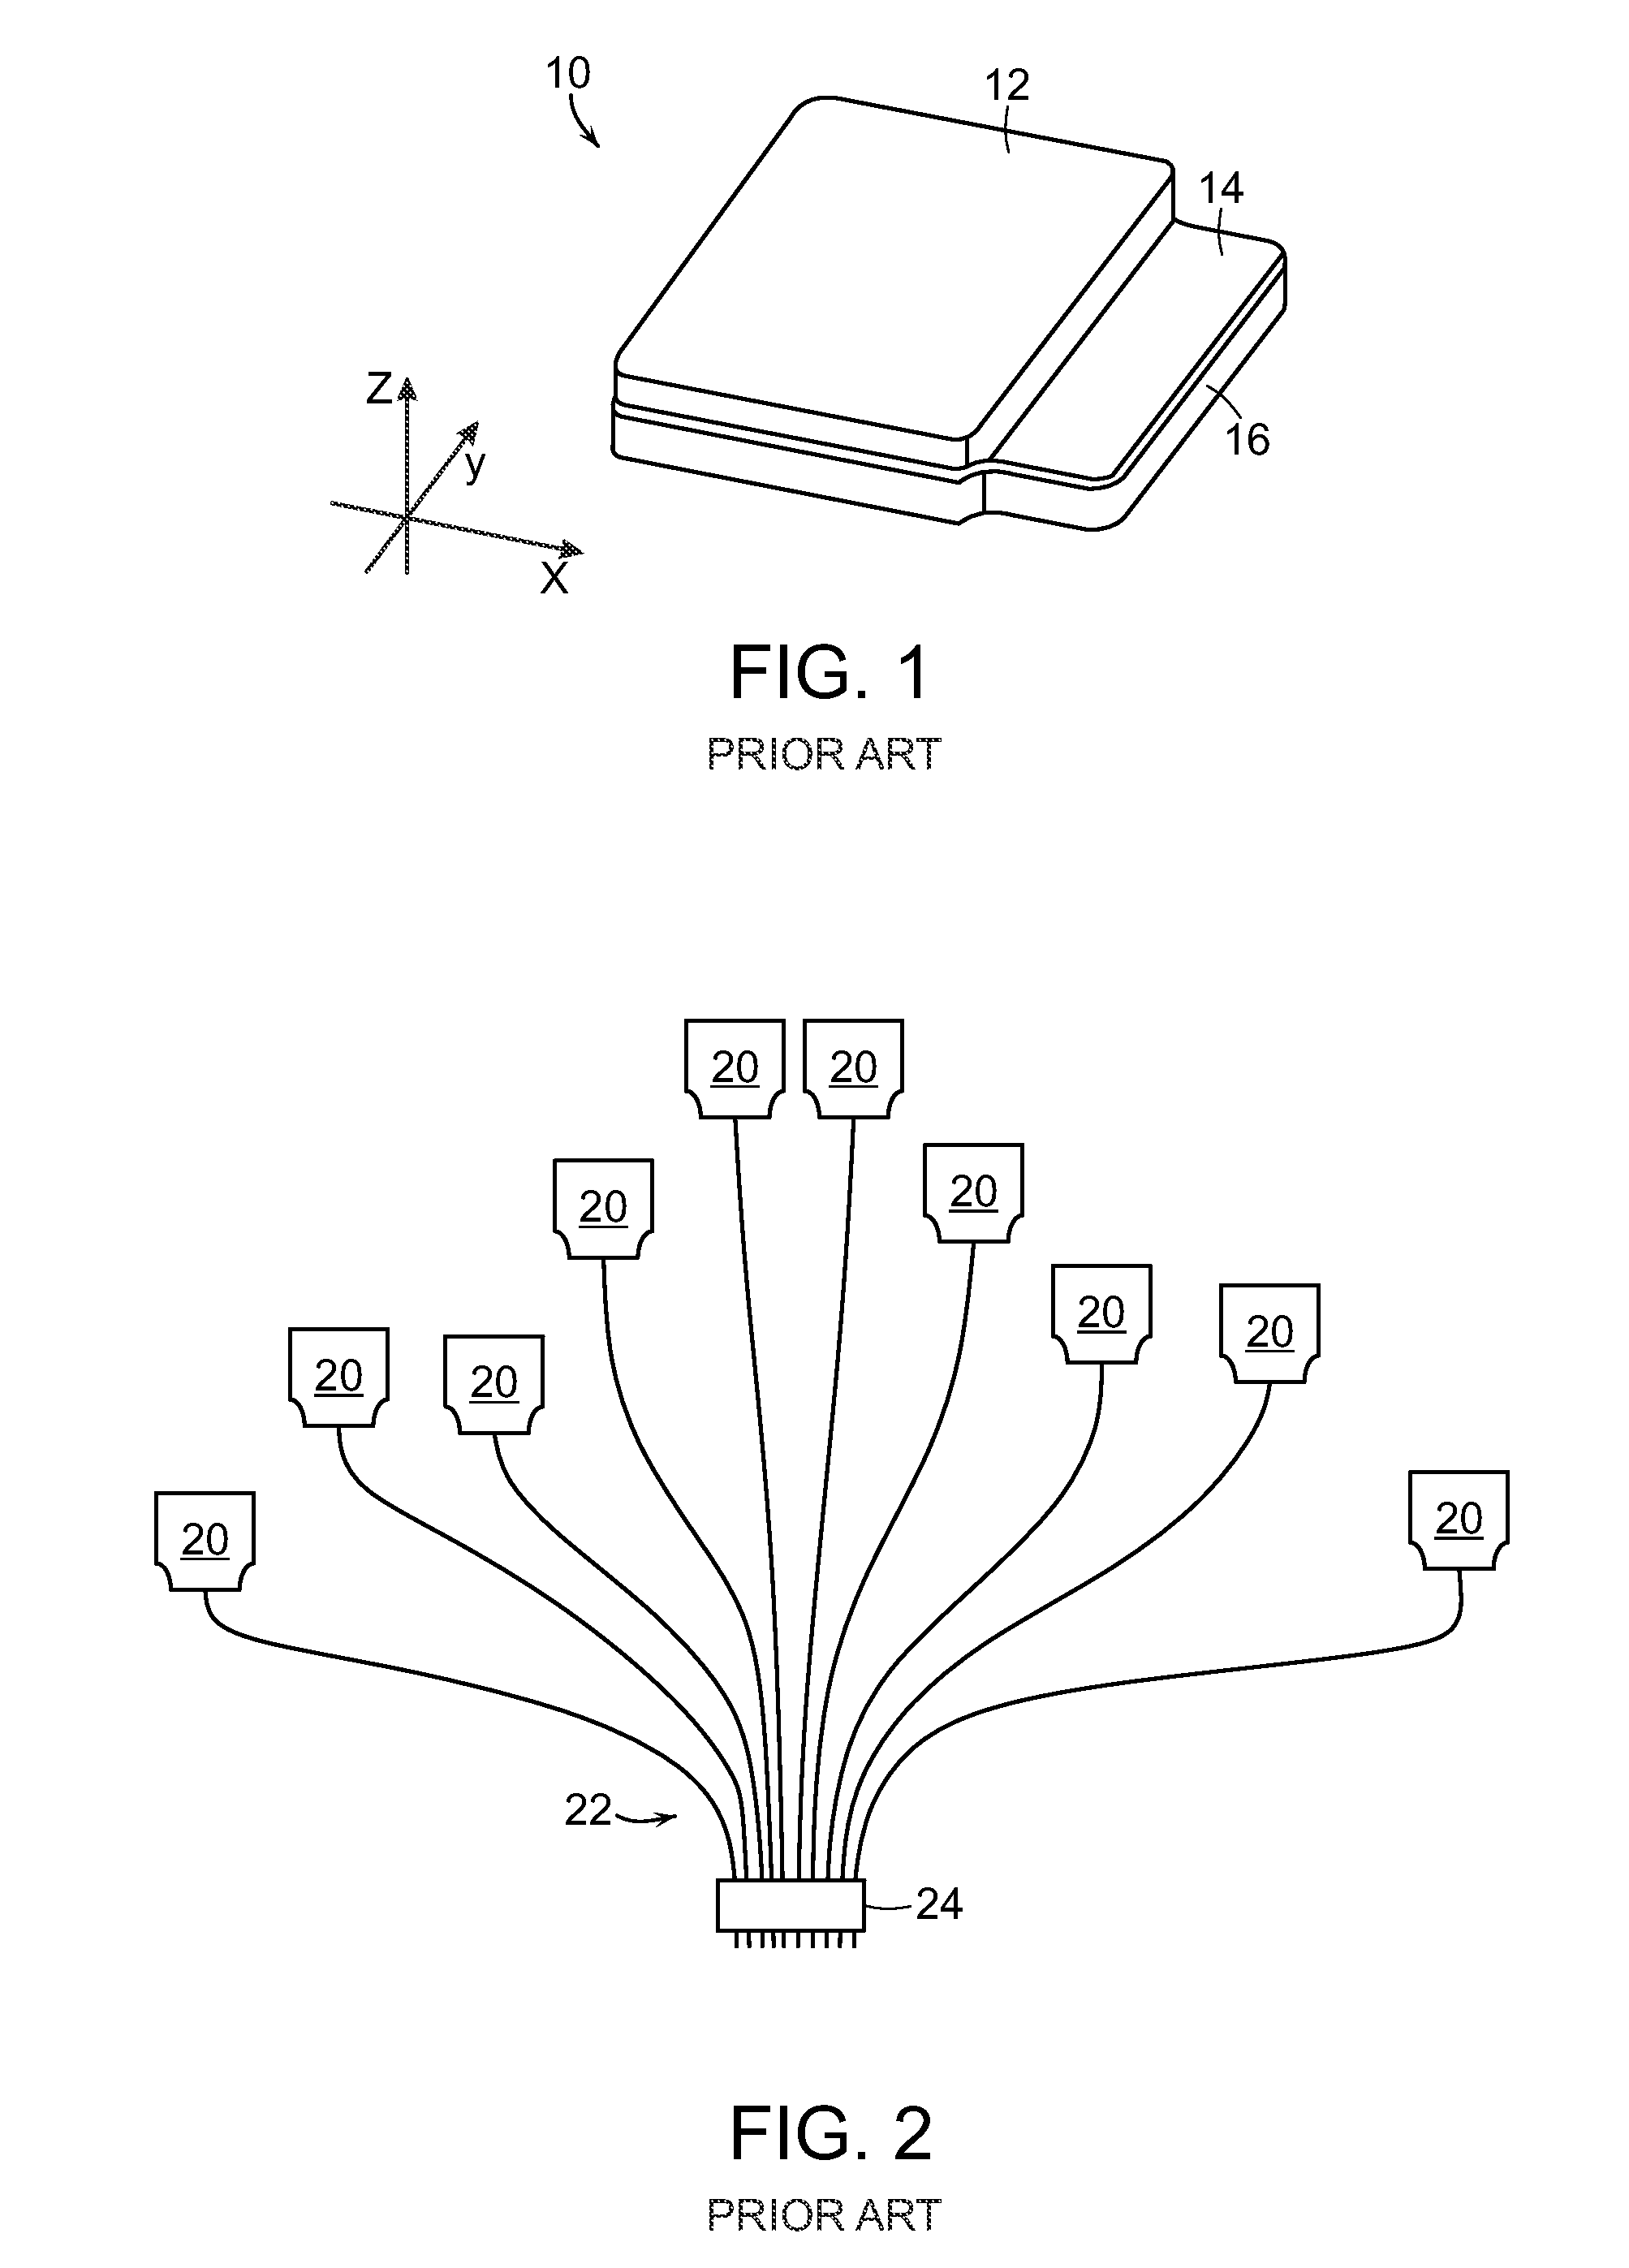 High impedance signal detection systems and methods for use in electrocardiogram detection systems